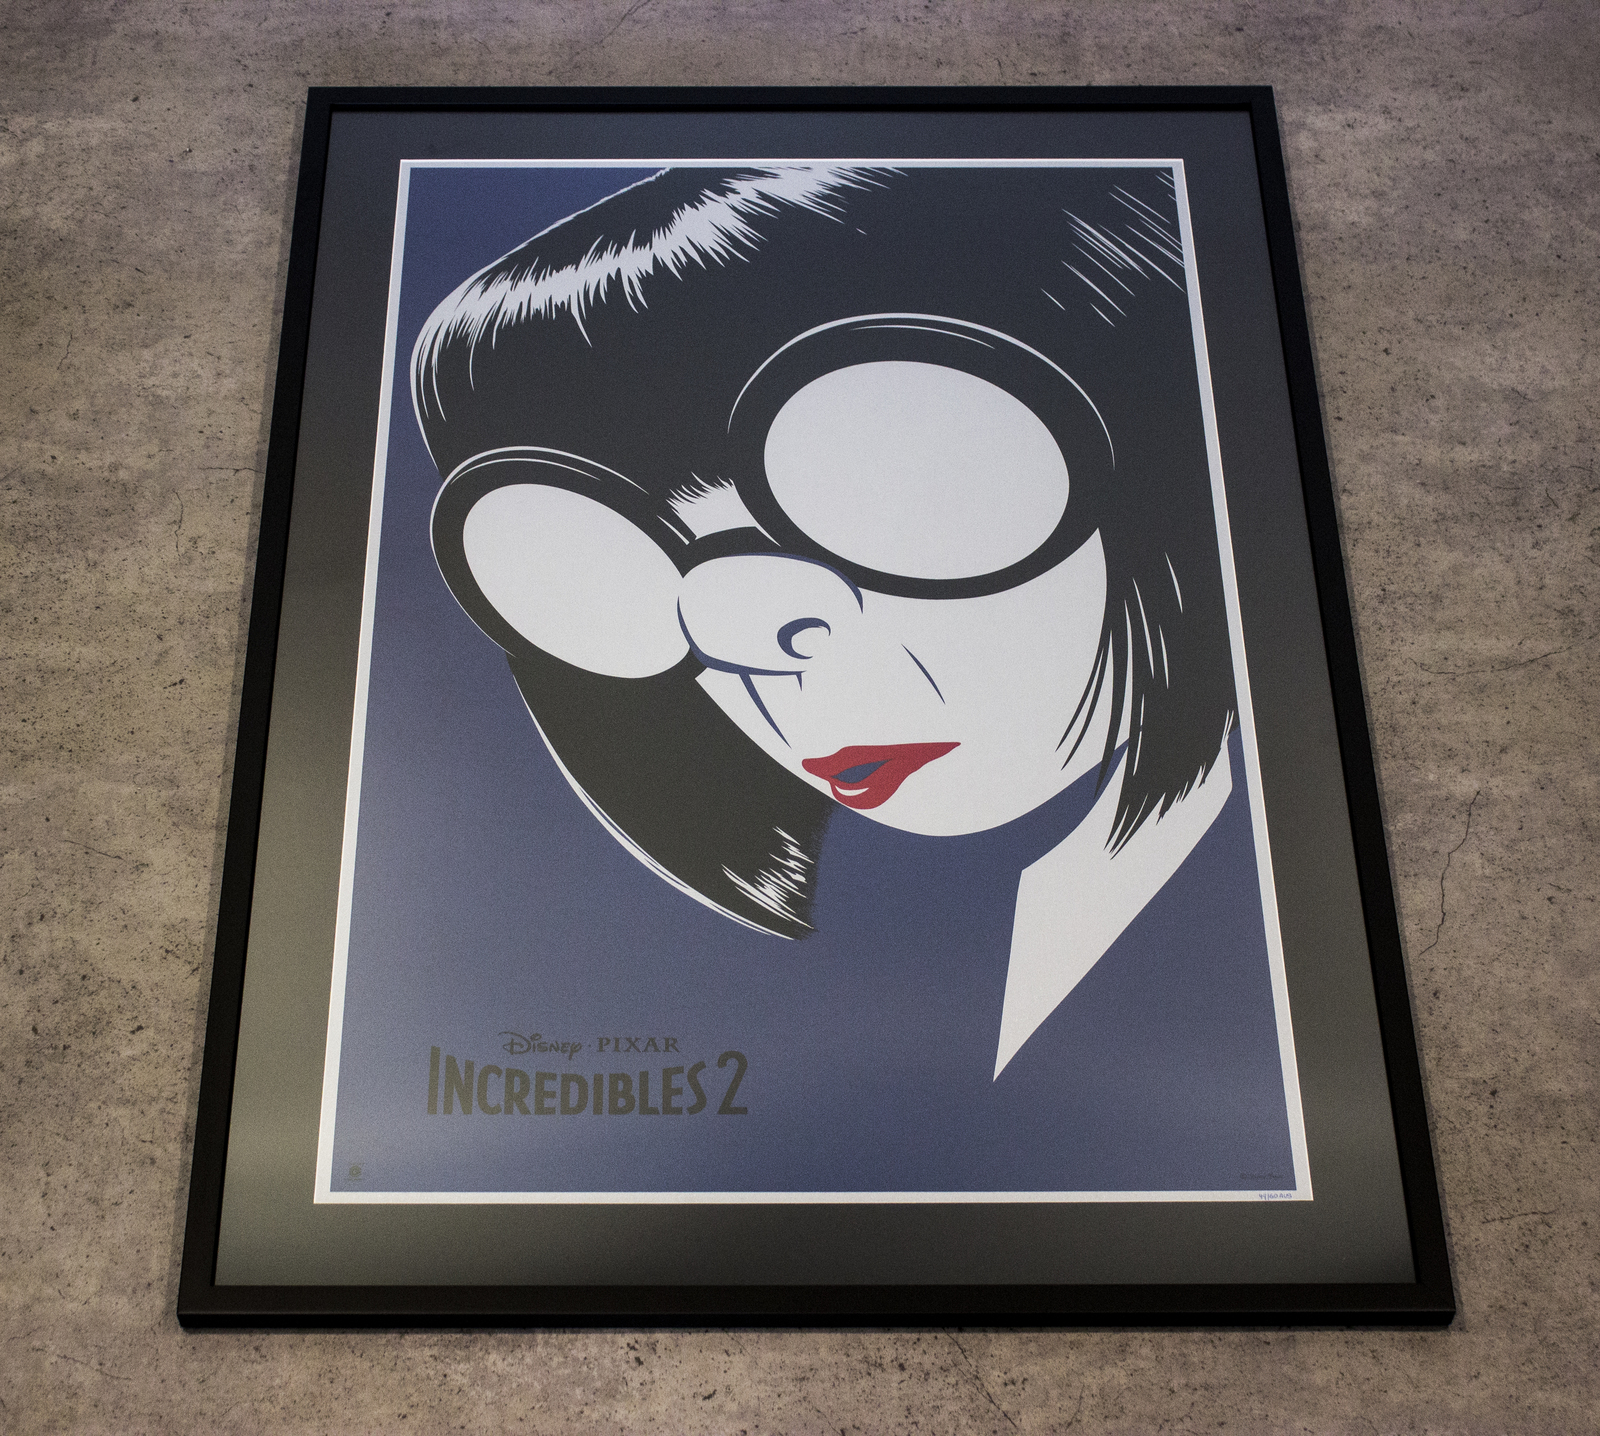 Edna Mode "Welcome Back Dahlings" Incredibles 2 AUS EXCLUSIVE Screen Print FRAMED